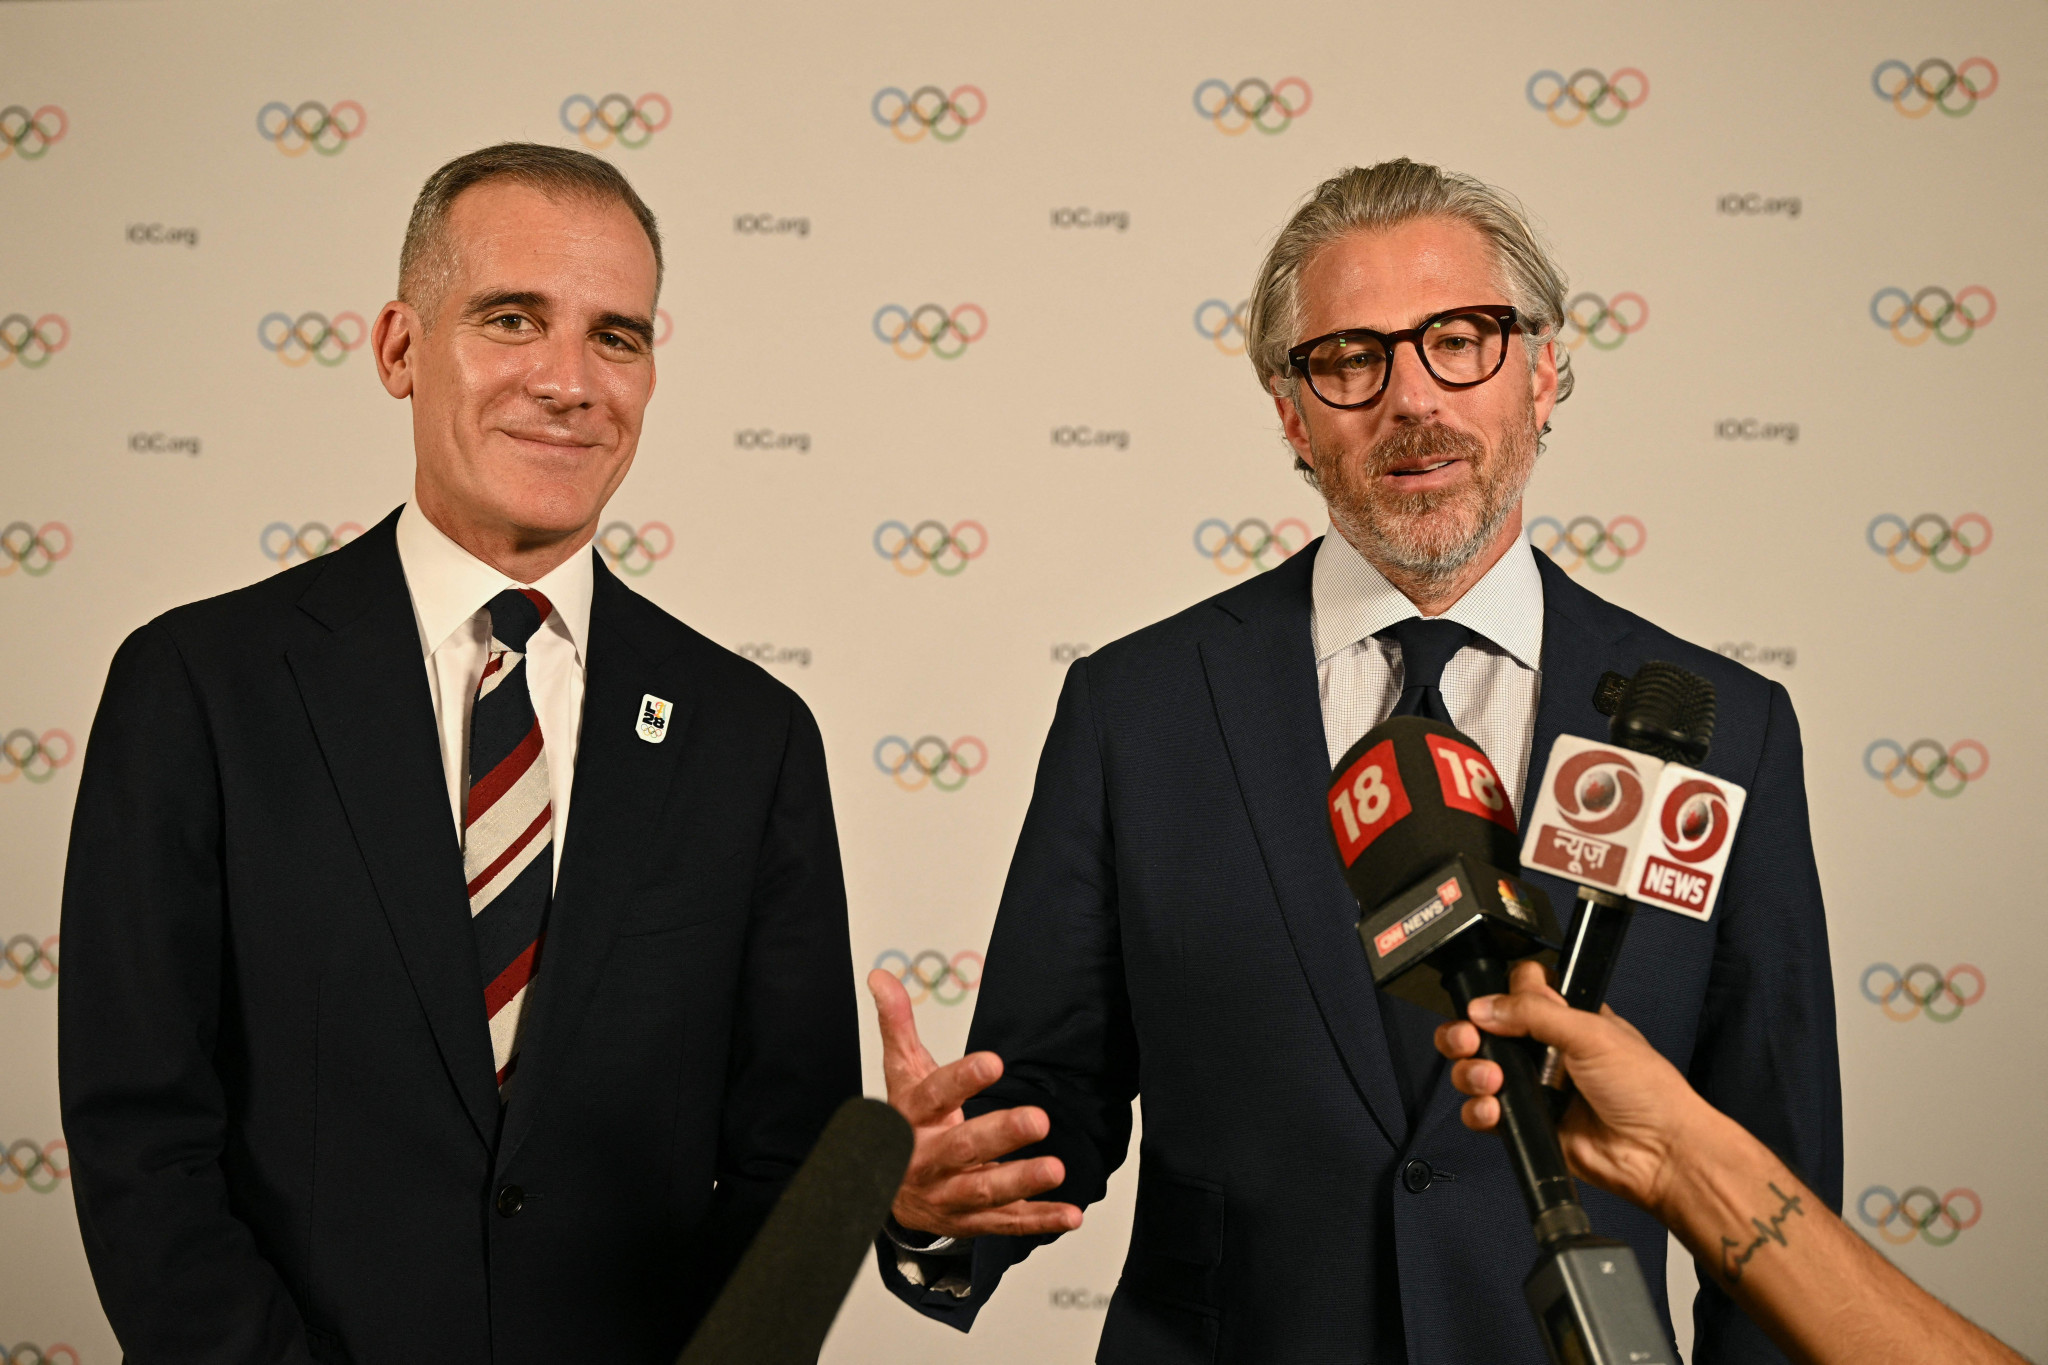 Former Los Angeles Mayor Eric Garcetti, left, joined Casey Wasserman, right, for the presentation to the IOC Session ©Getty Images